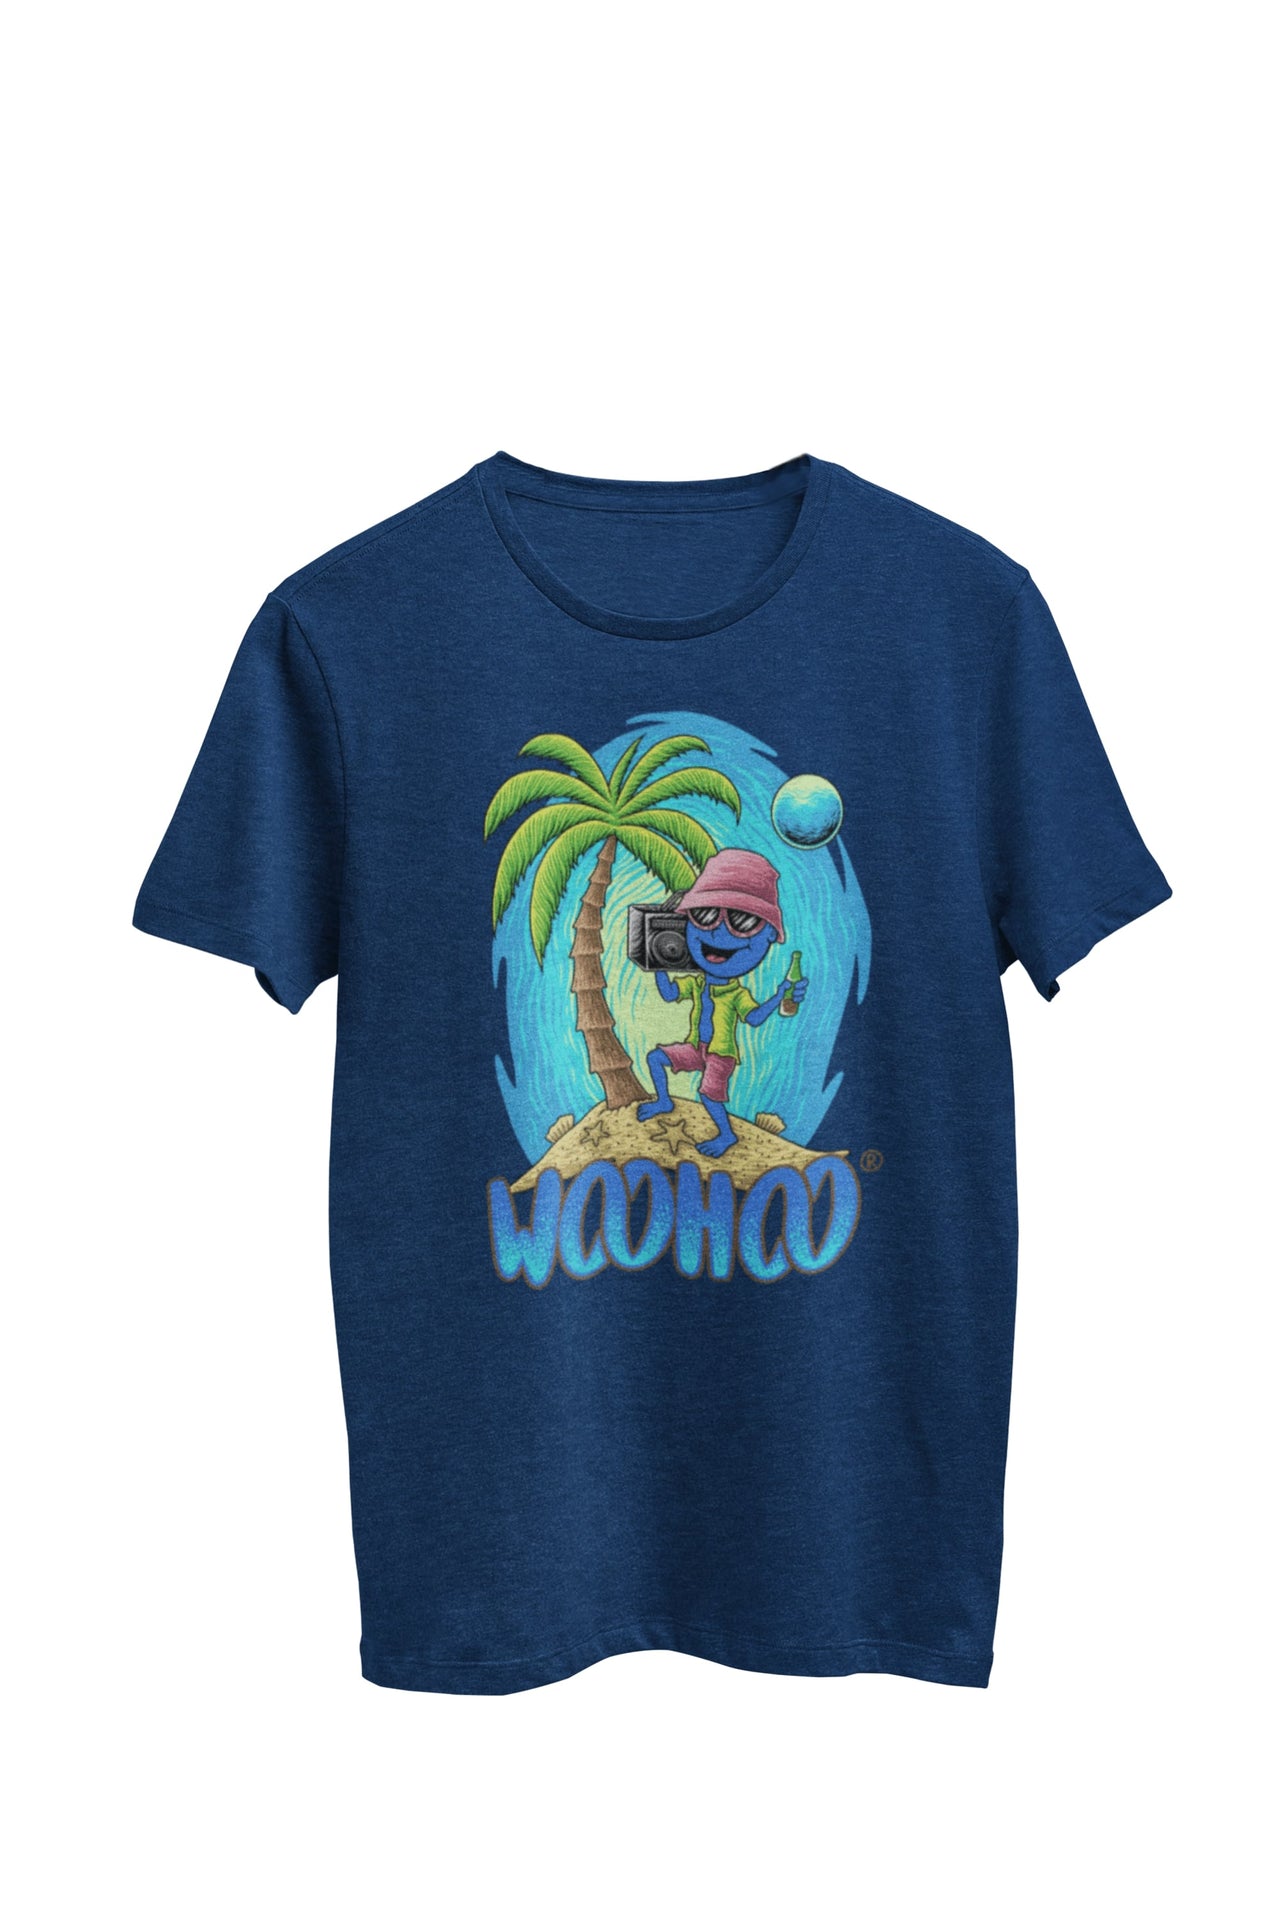 WooHooBerry embracing a Jamaican-inspired ensemble, dancing with a music box on a tropical island during an outdoor activity. Their navy T-shirt proudly features the text 'WooHoo,' adding to the vibrant and festive atmosphere.